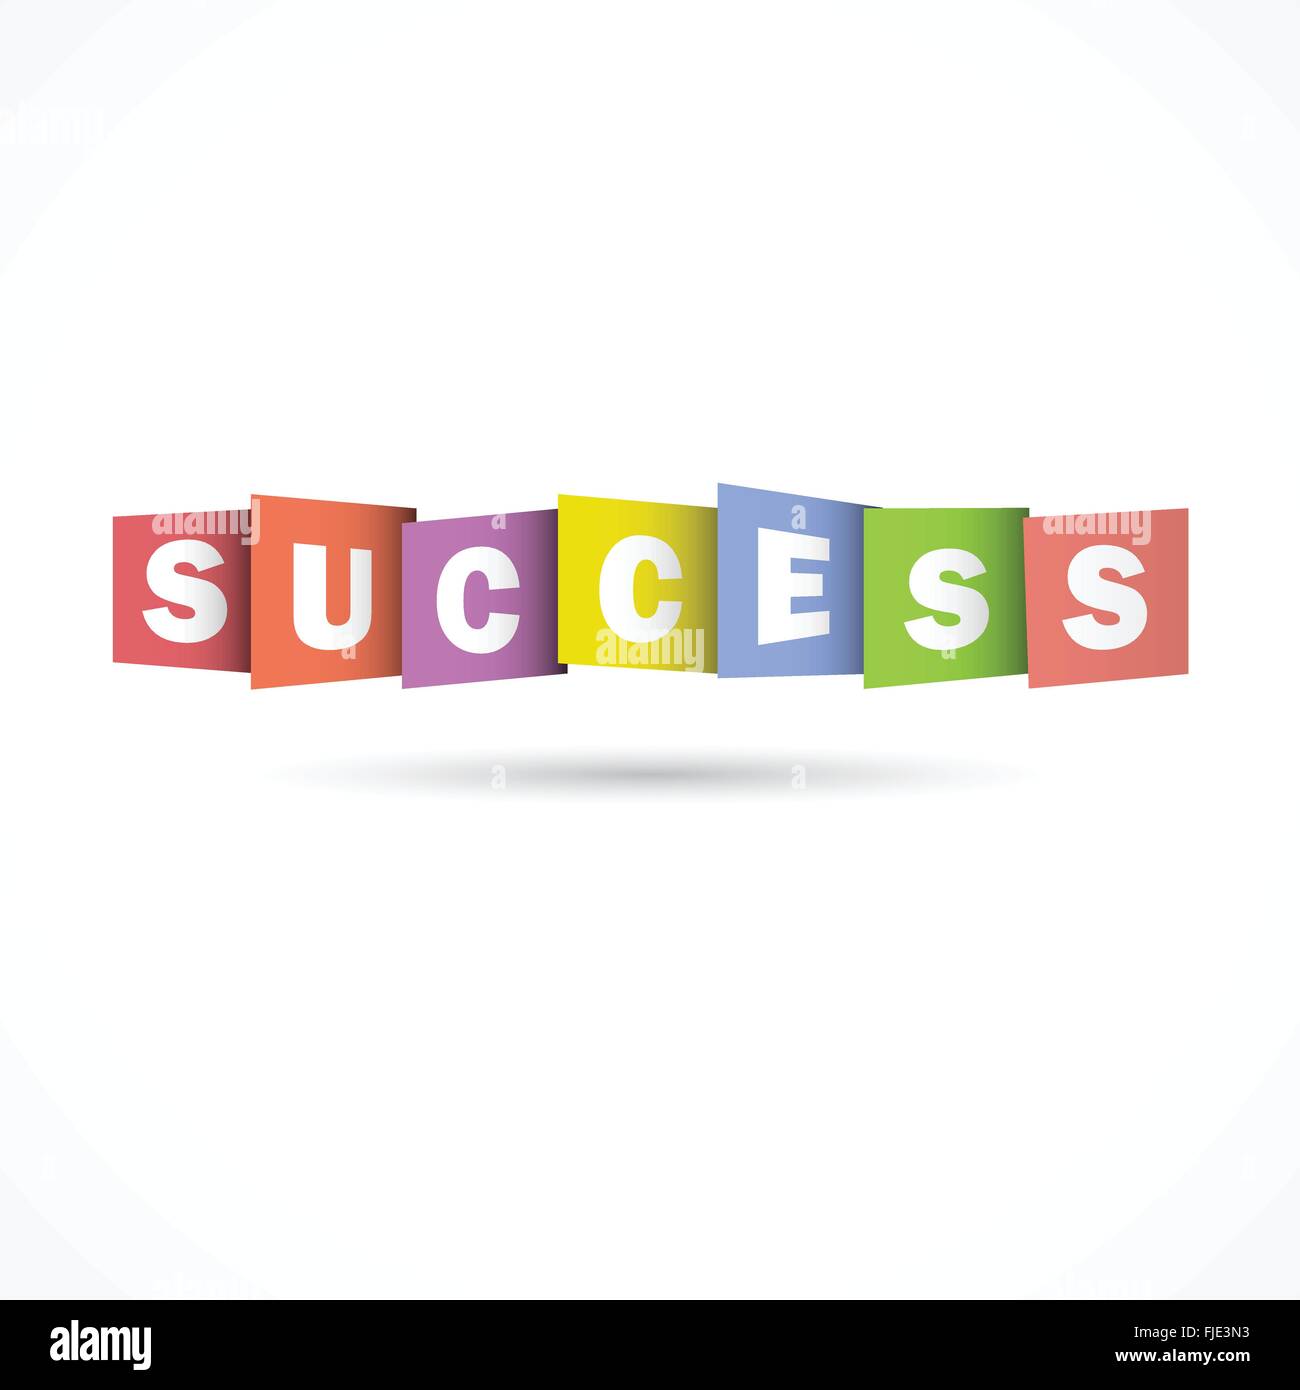 'SUCCESS' Overlapping Letters Vector Icon. Creative Vector Typography Concept. Inspirational work and success business quote. Stock Vector